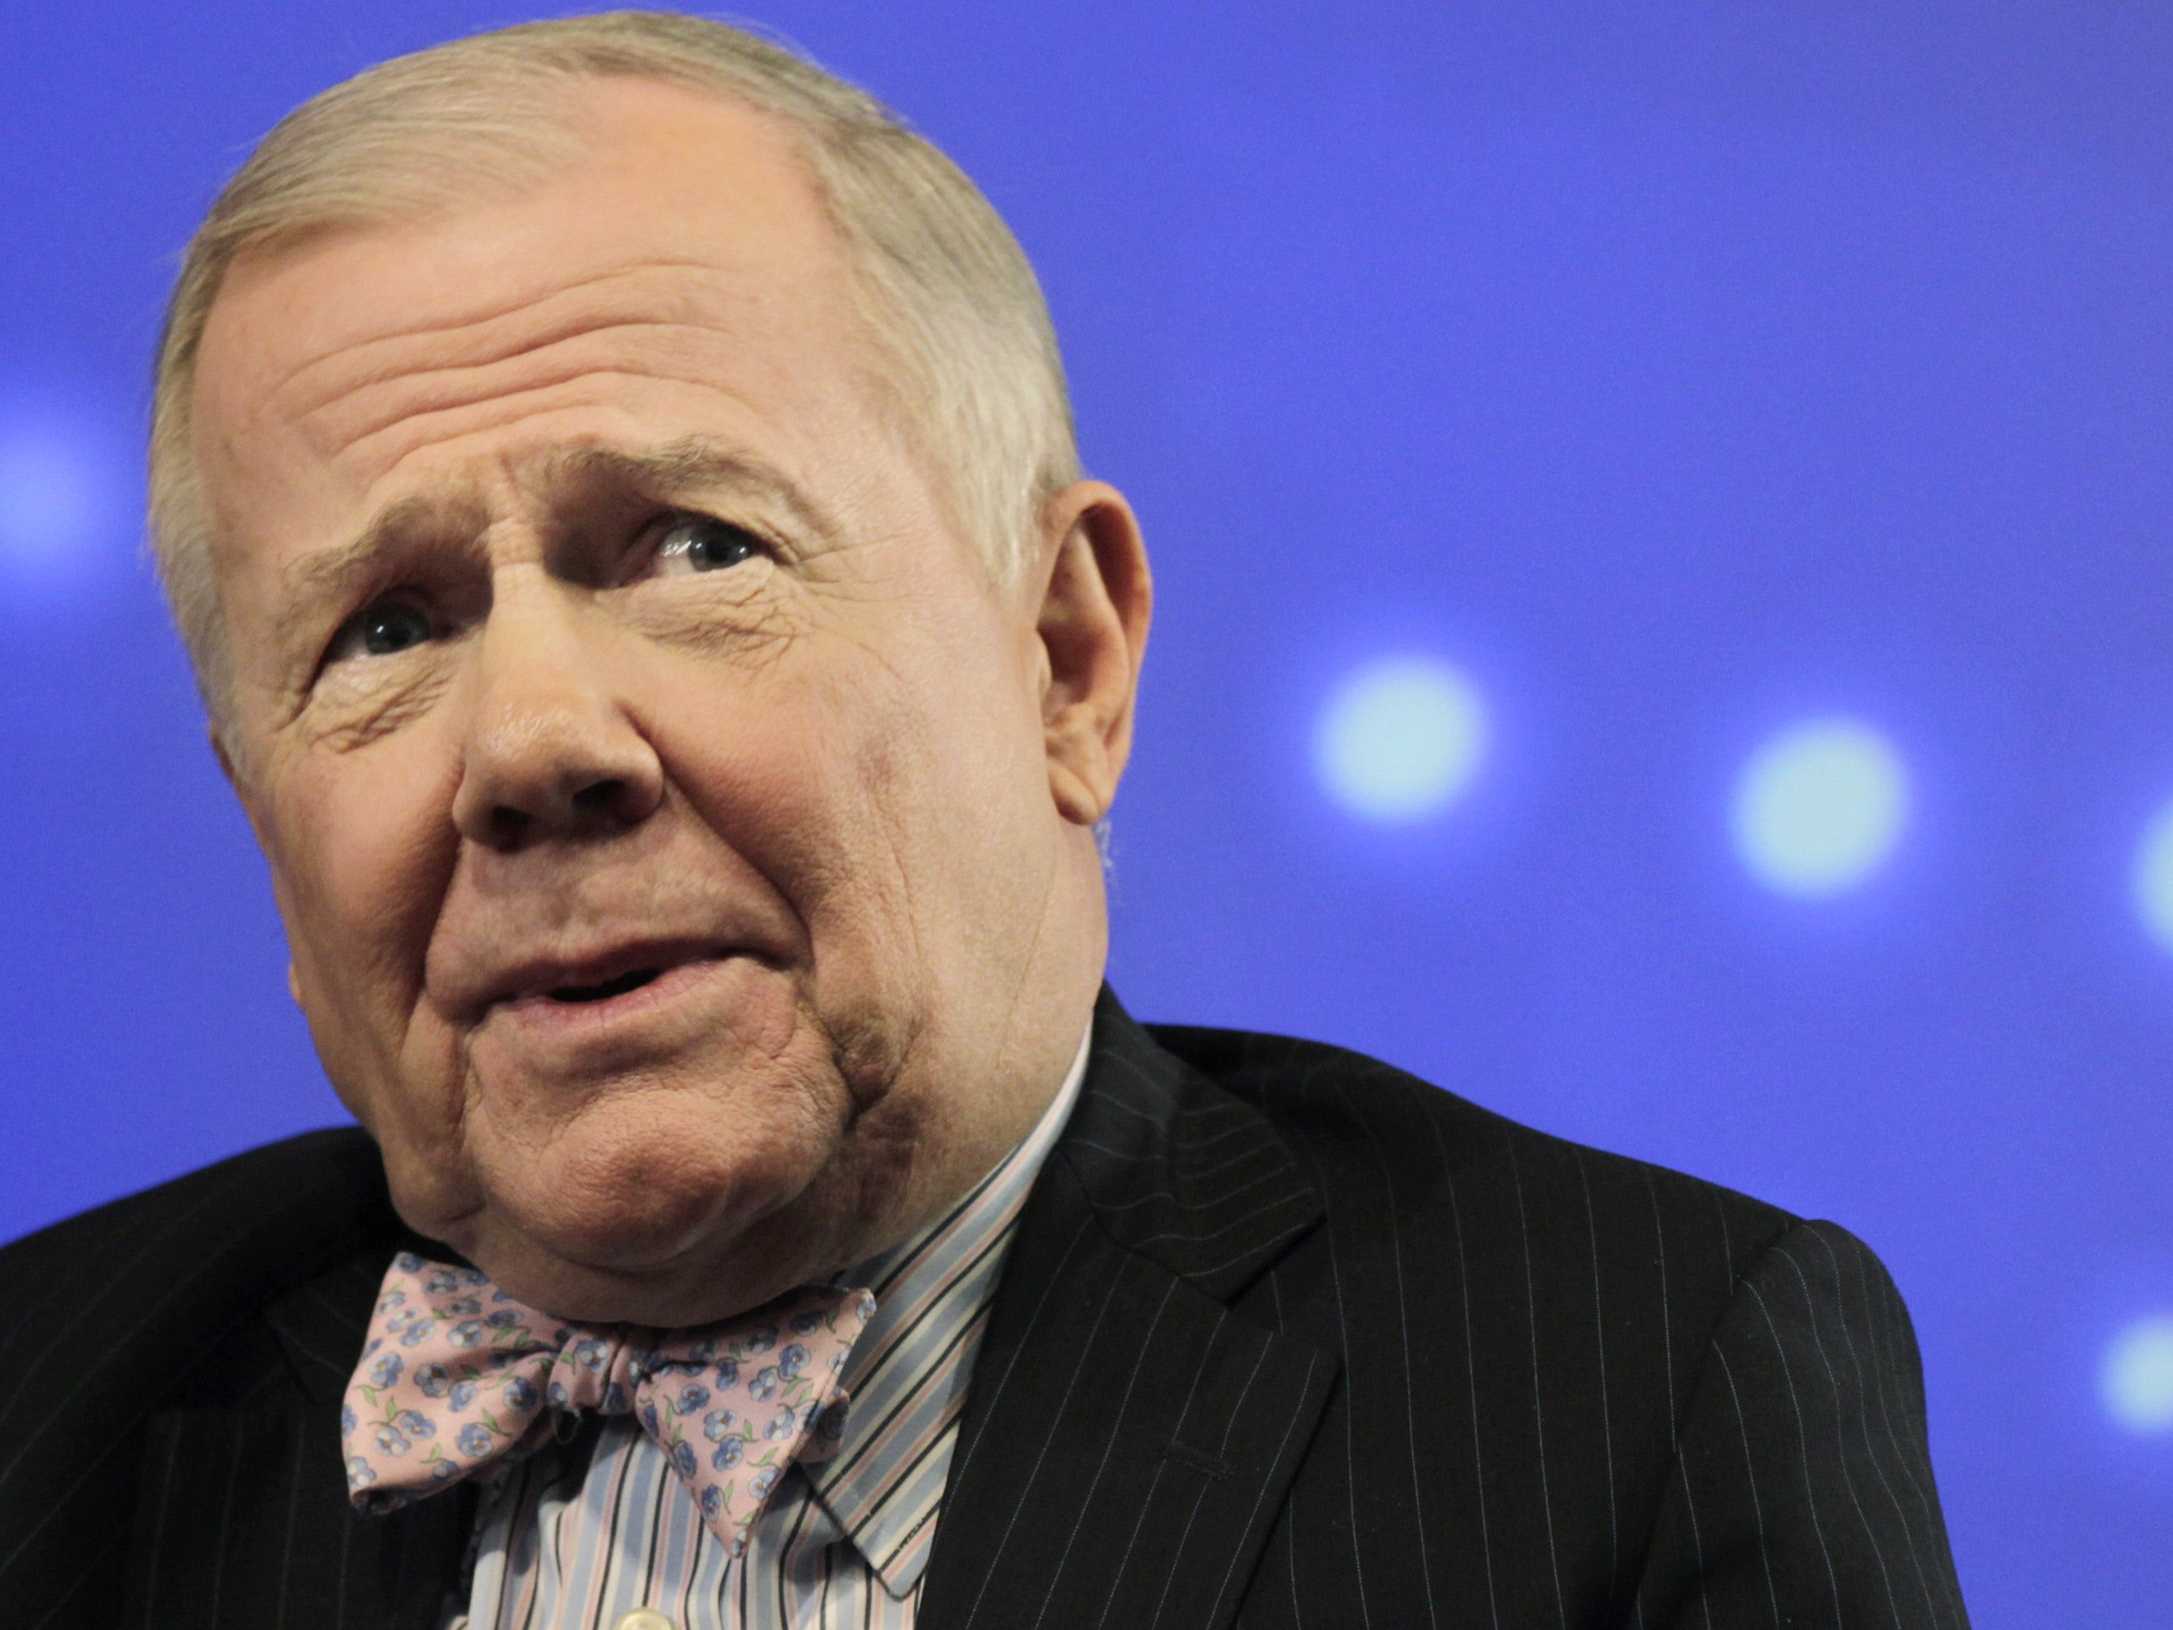 jim-rogers-right-now-id-rather-buy-silver-than-gold